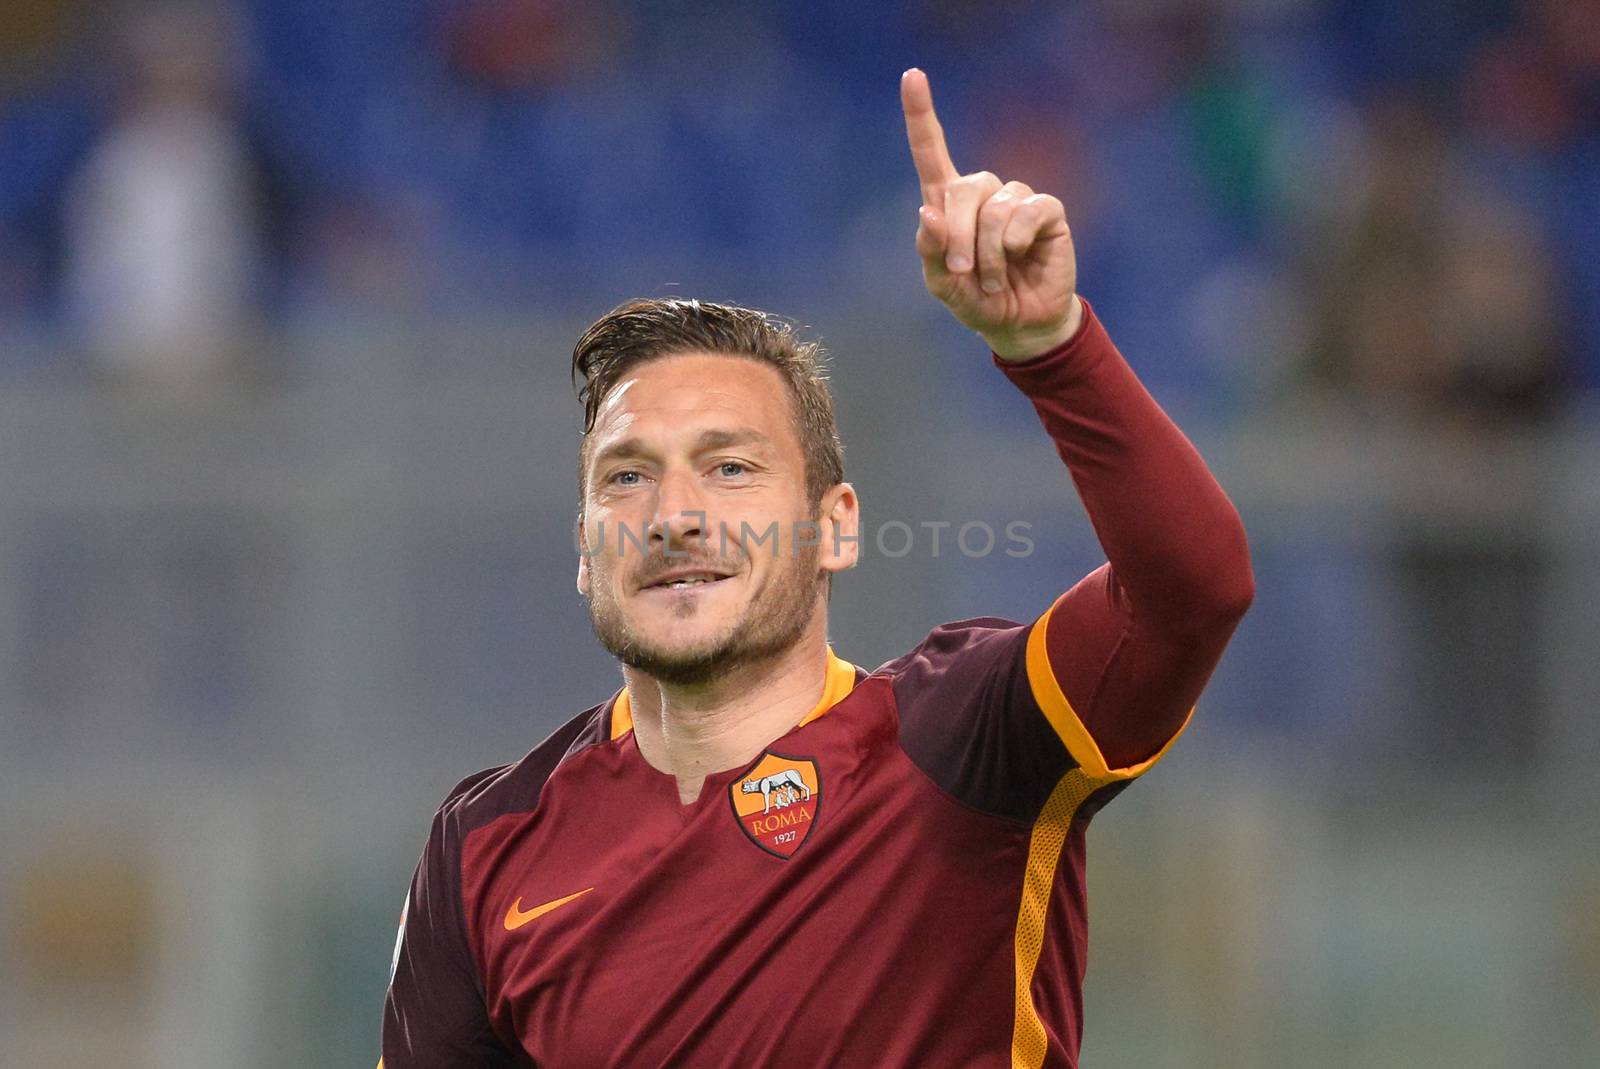 ITALY, Rome: Francesco Totti of AS Roma celebrates after scoring the team's third goal from penalty spot during the Serie A match between AS Roma and Torino FC at Stadio Olimpico on April 20, 2016 in Rome, Italy. 